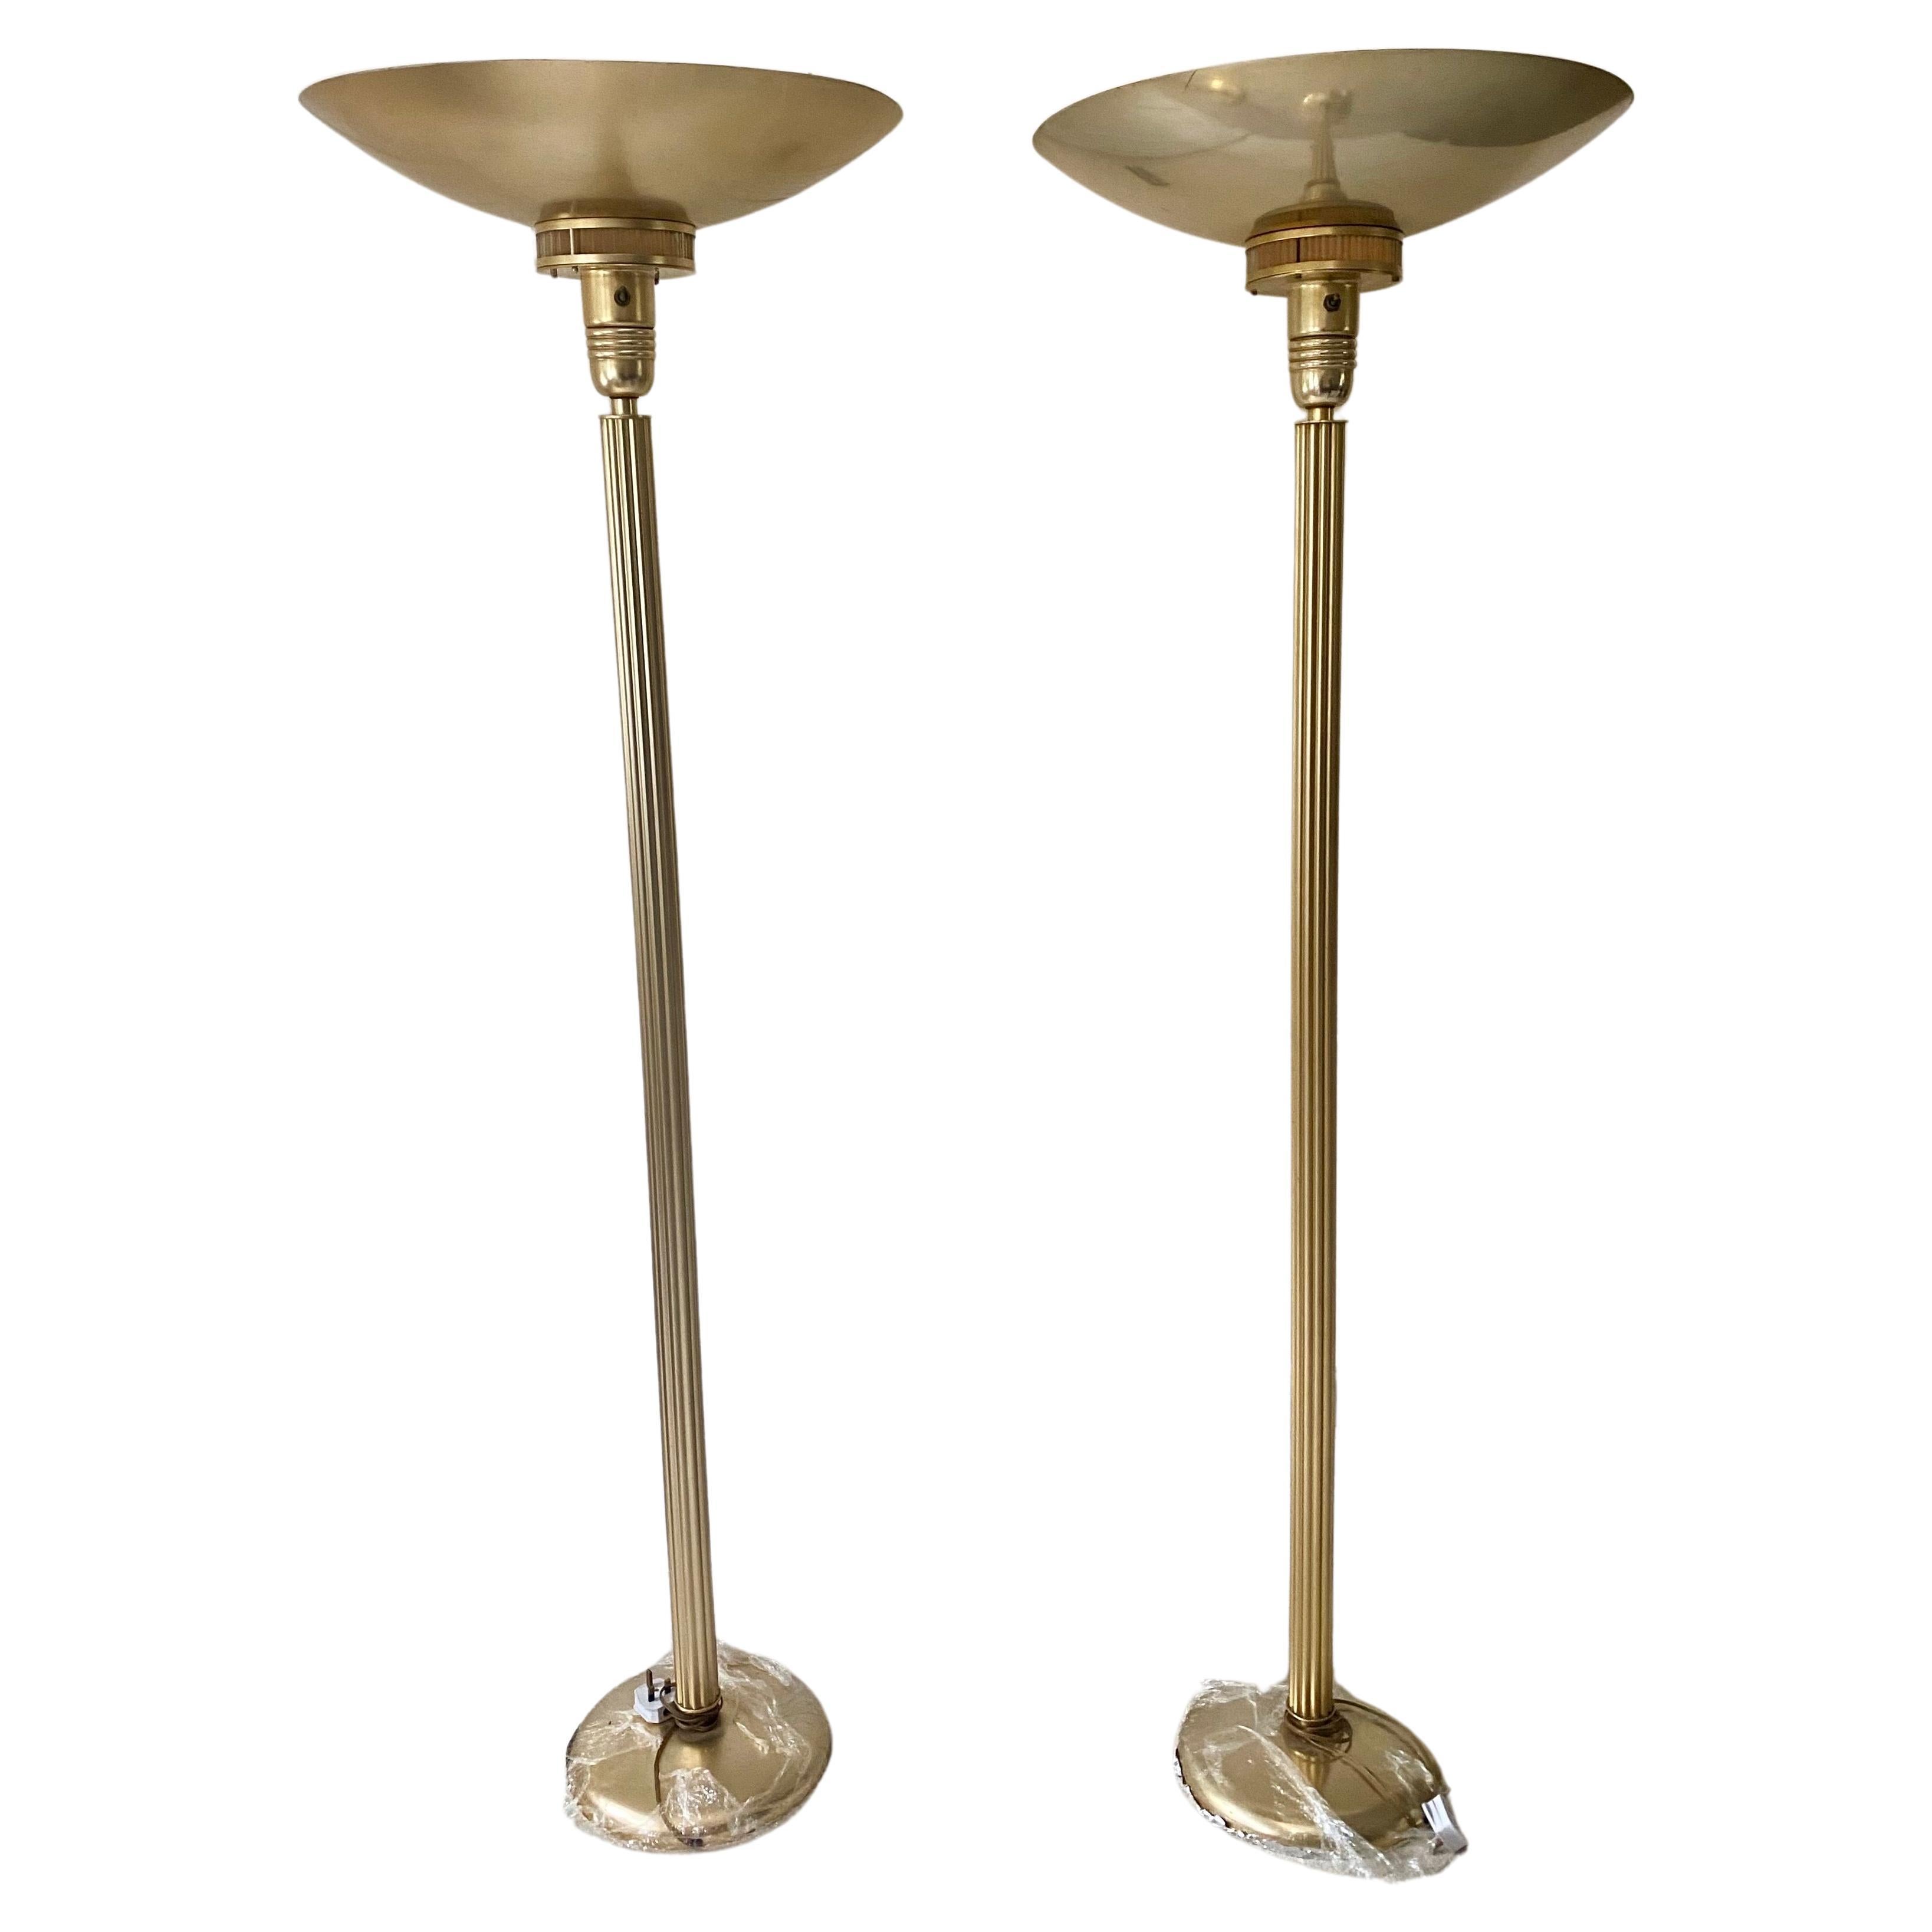 A Pair of Art Deco Floor Lamps Large Dish Uplighters Circa 1920's Torchiers  For Sale